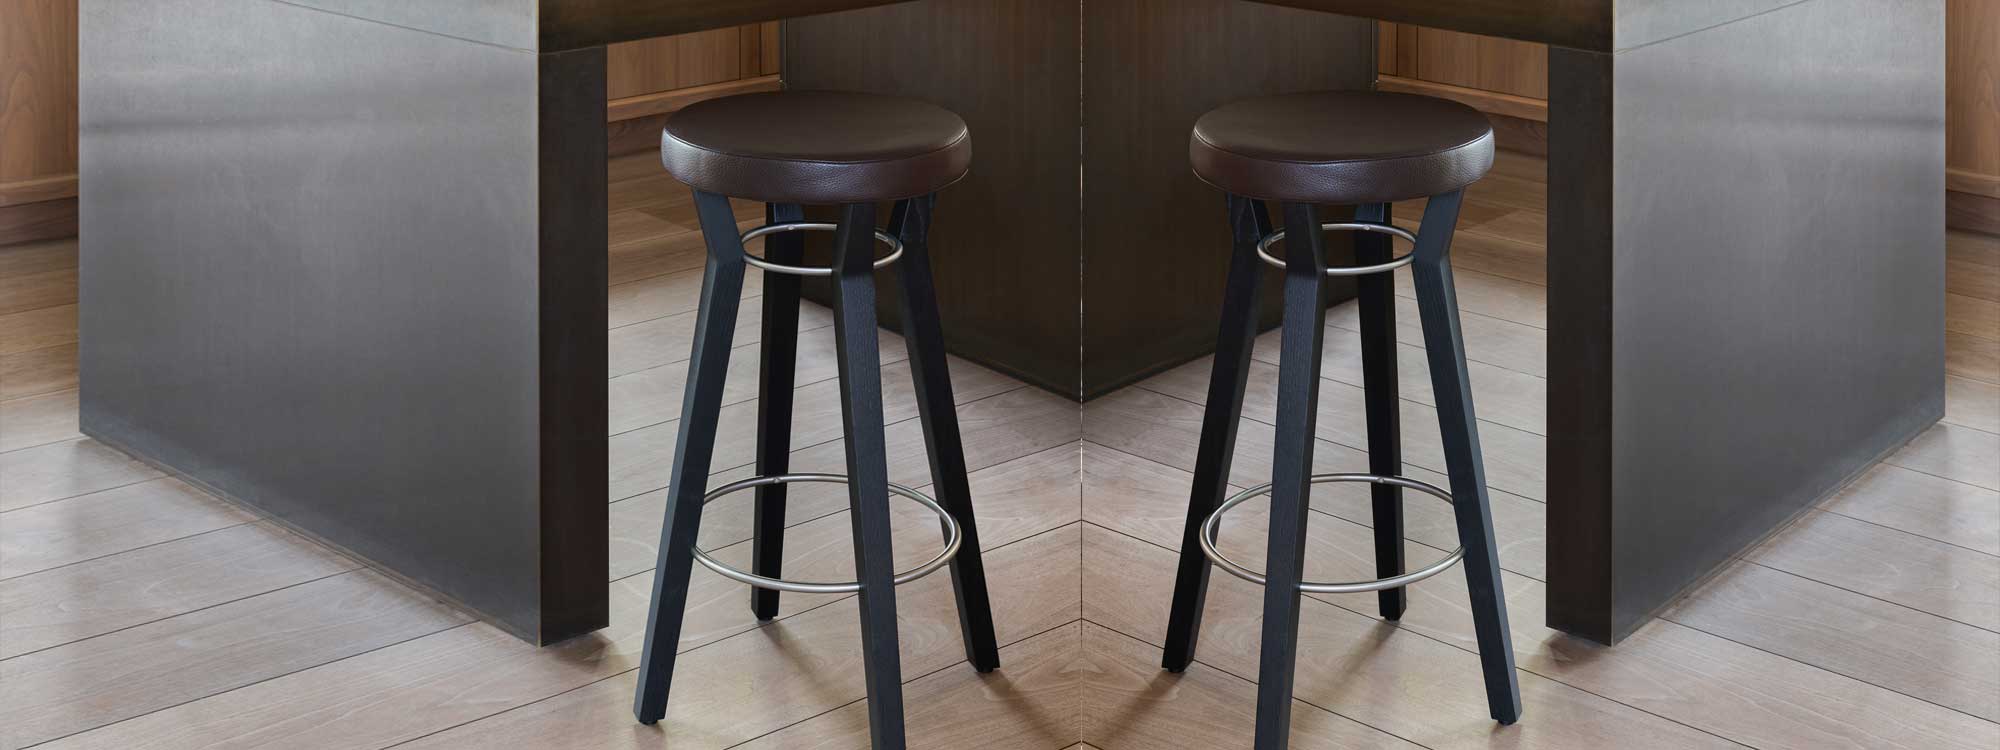 Eos modern barstool is a hardwood bar chair by Frederik Delbart in high quality hospitality furniture materials by WildSpirit luxury furniture